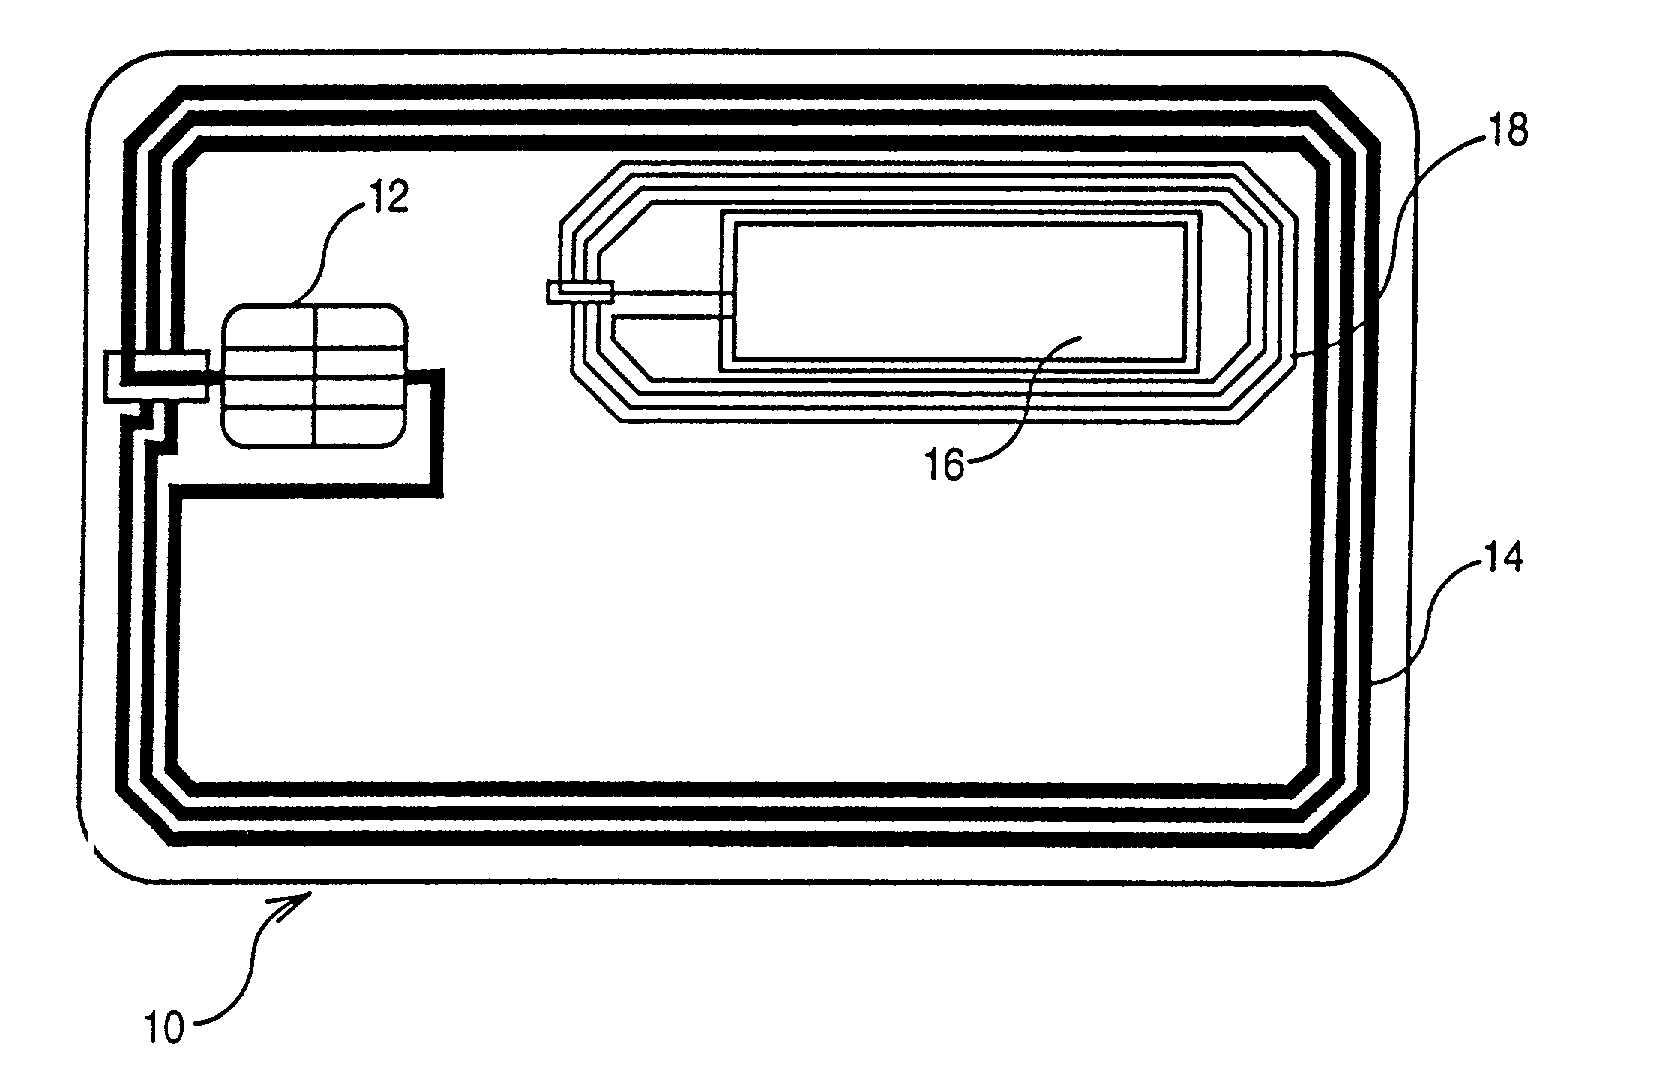 Contact-free display peripheral device for contact-free portable object